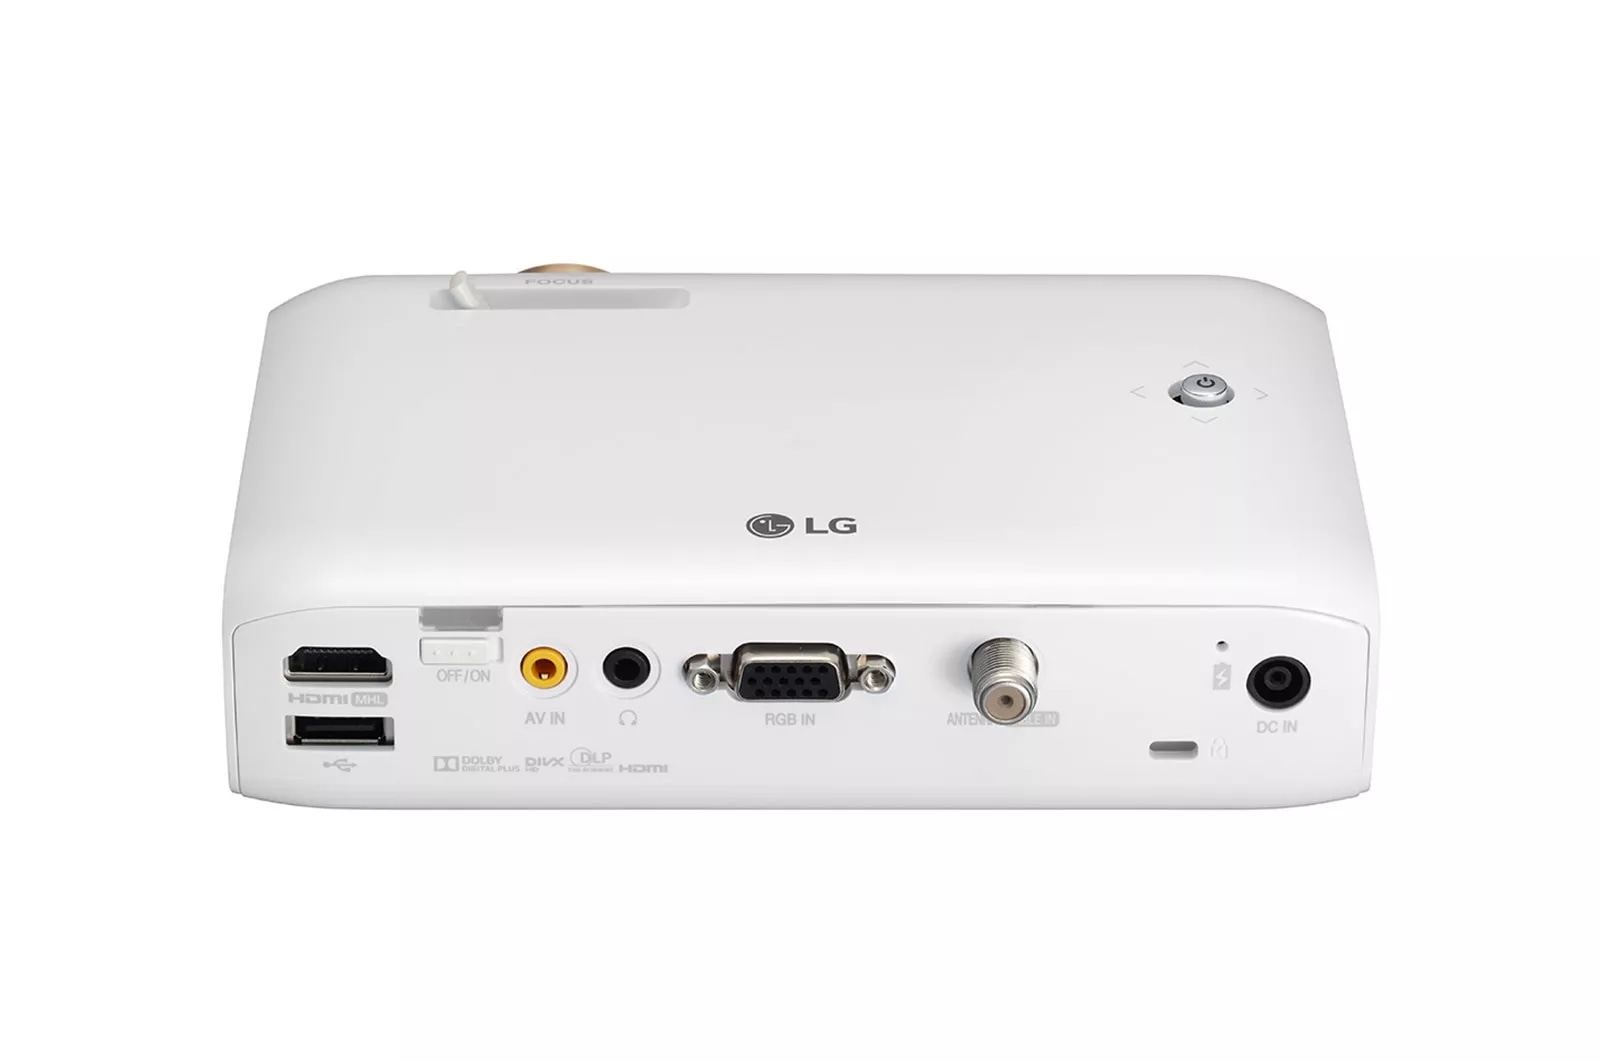 LG PH550: Minibeam LED Projector With Built-In Battery and Screen 